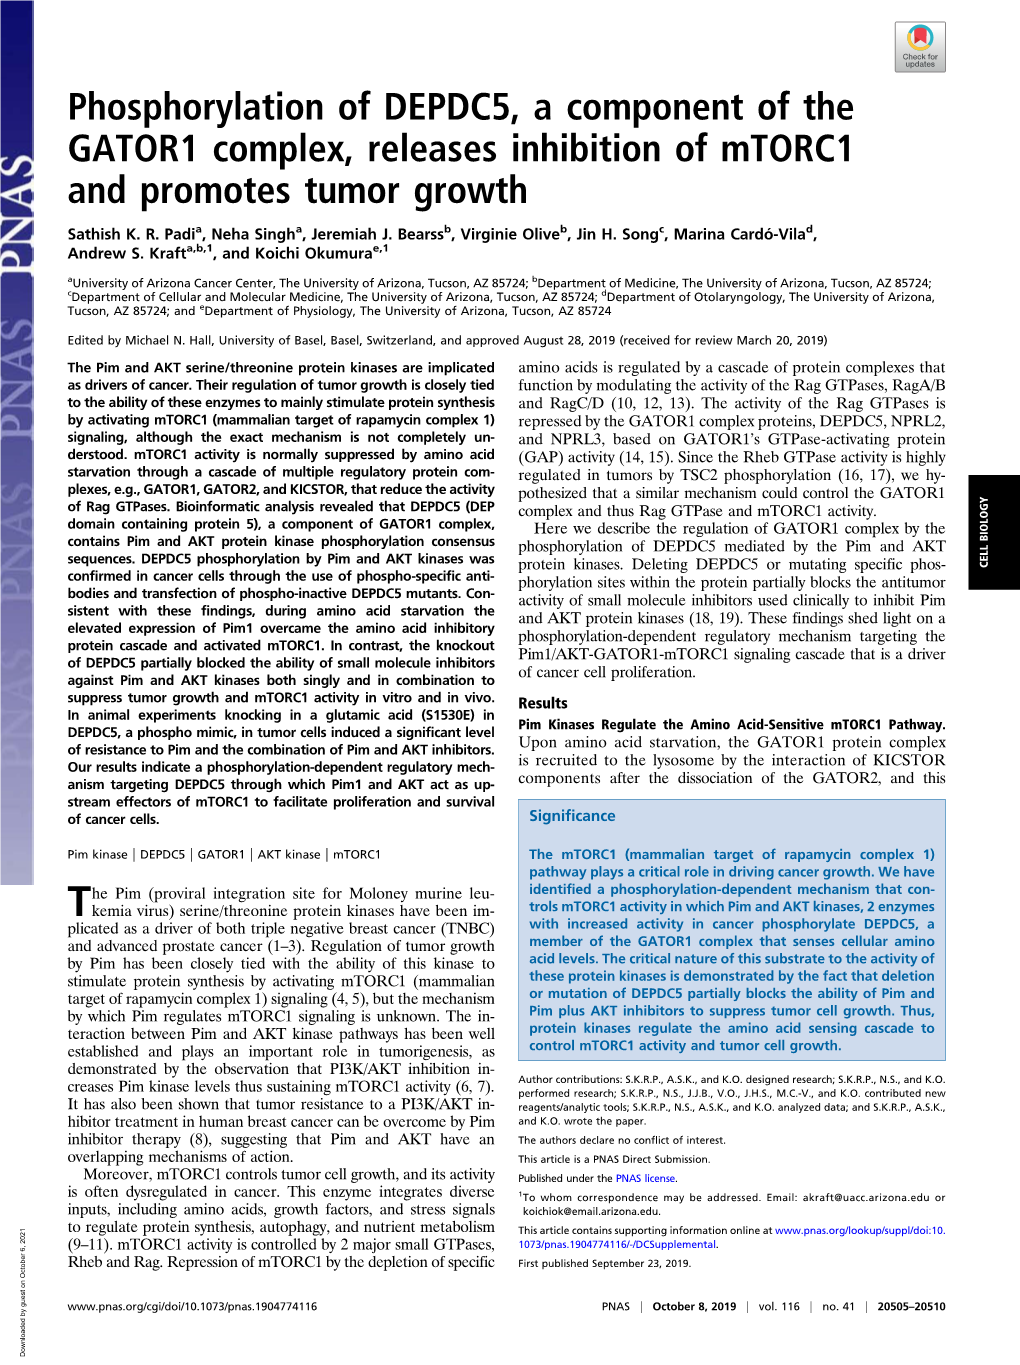 Phosphorylation of DEPDC5, a Component of the GATOR1 Complex, Releases Inhibition of Mtorc1 and Promotes Tumor Growth